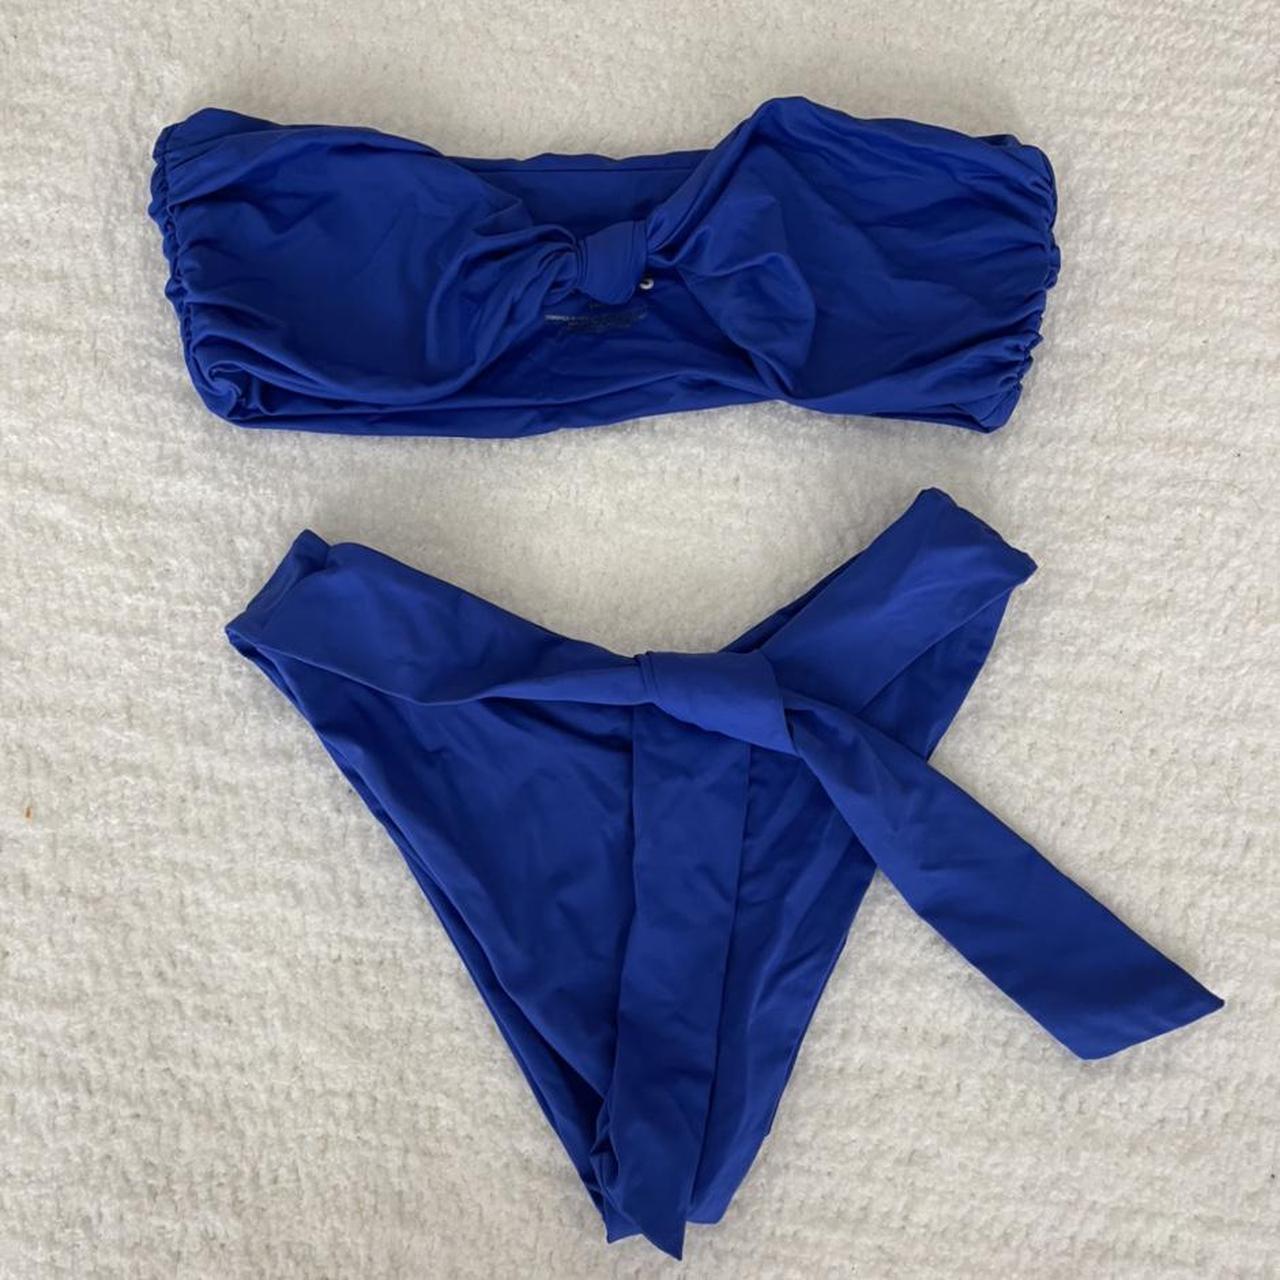 Product Image 1 - Frankie’s bikini
Comes with straps for